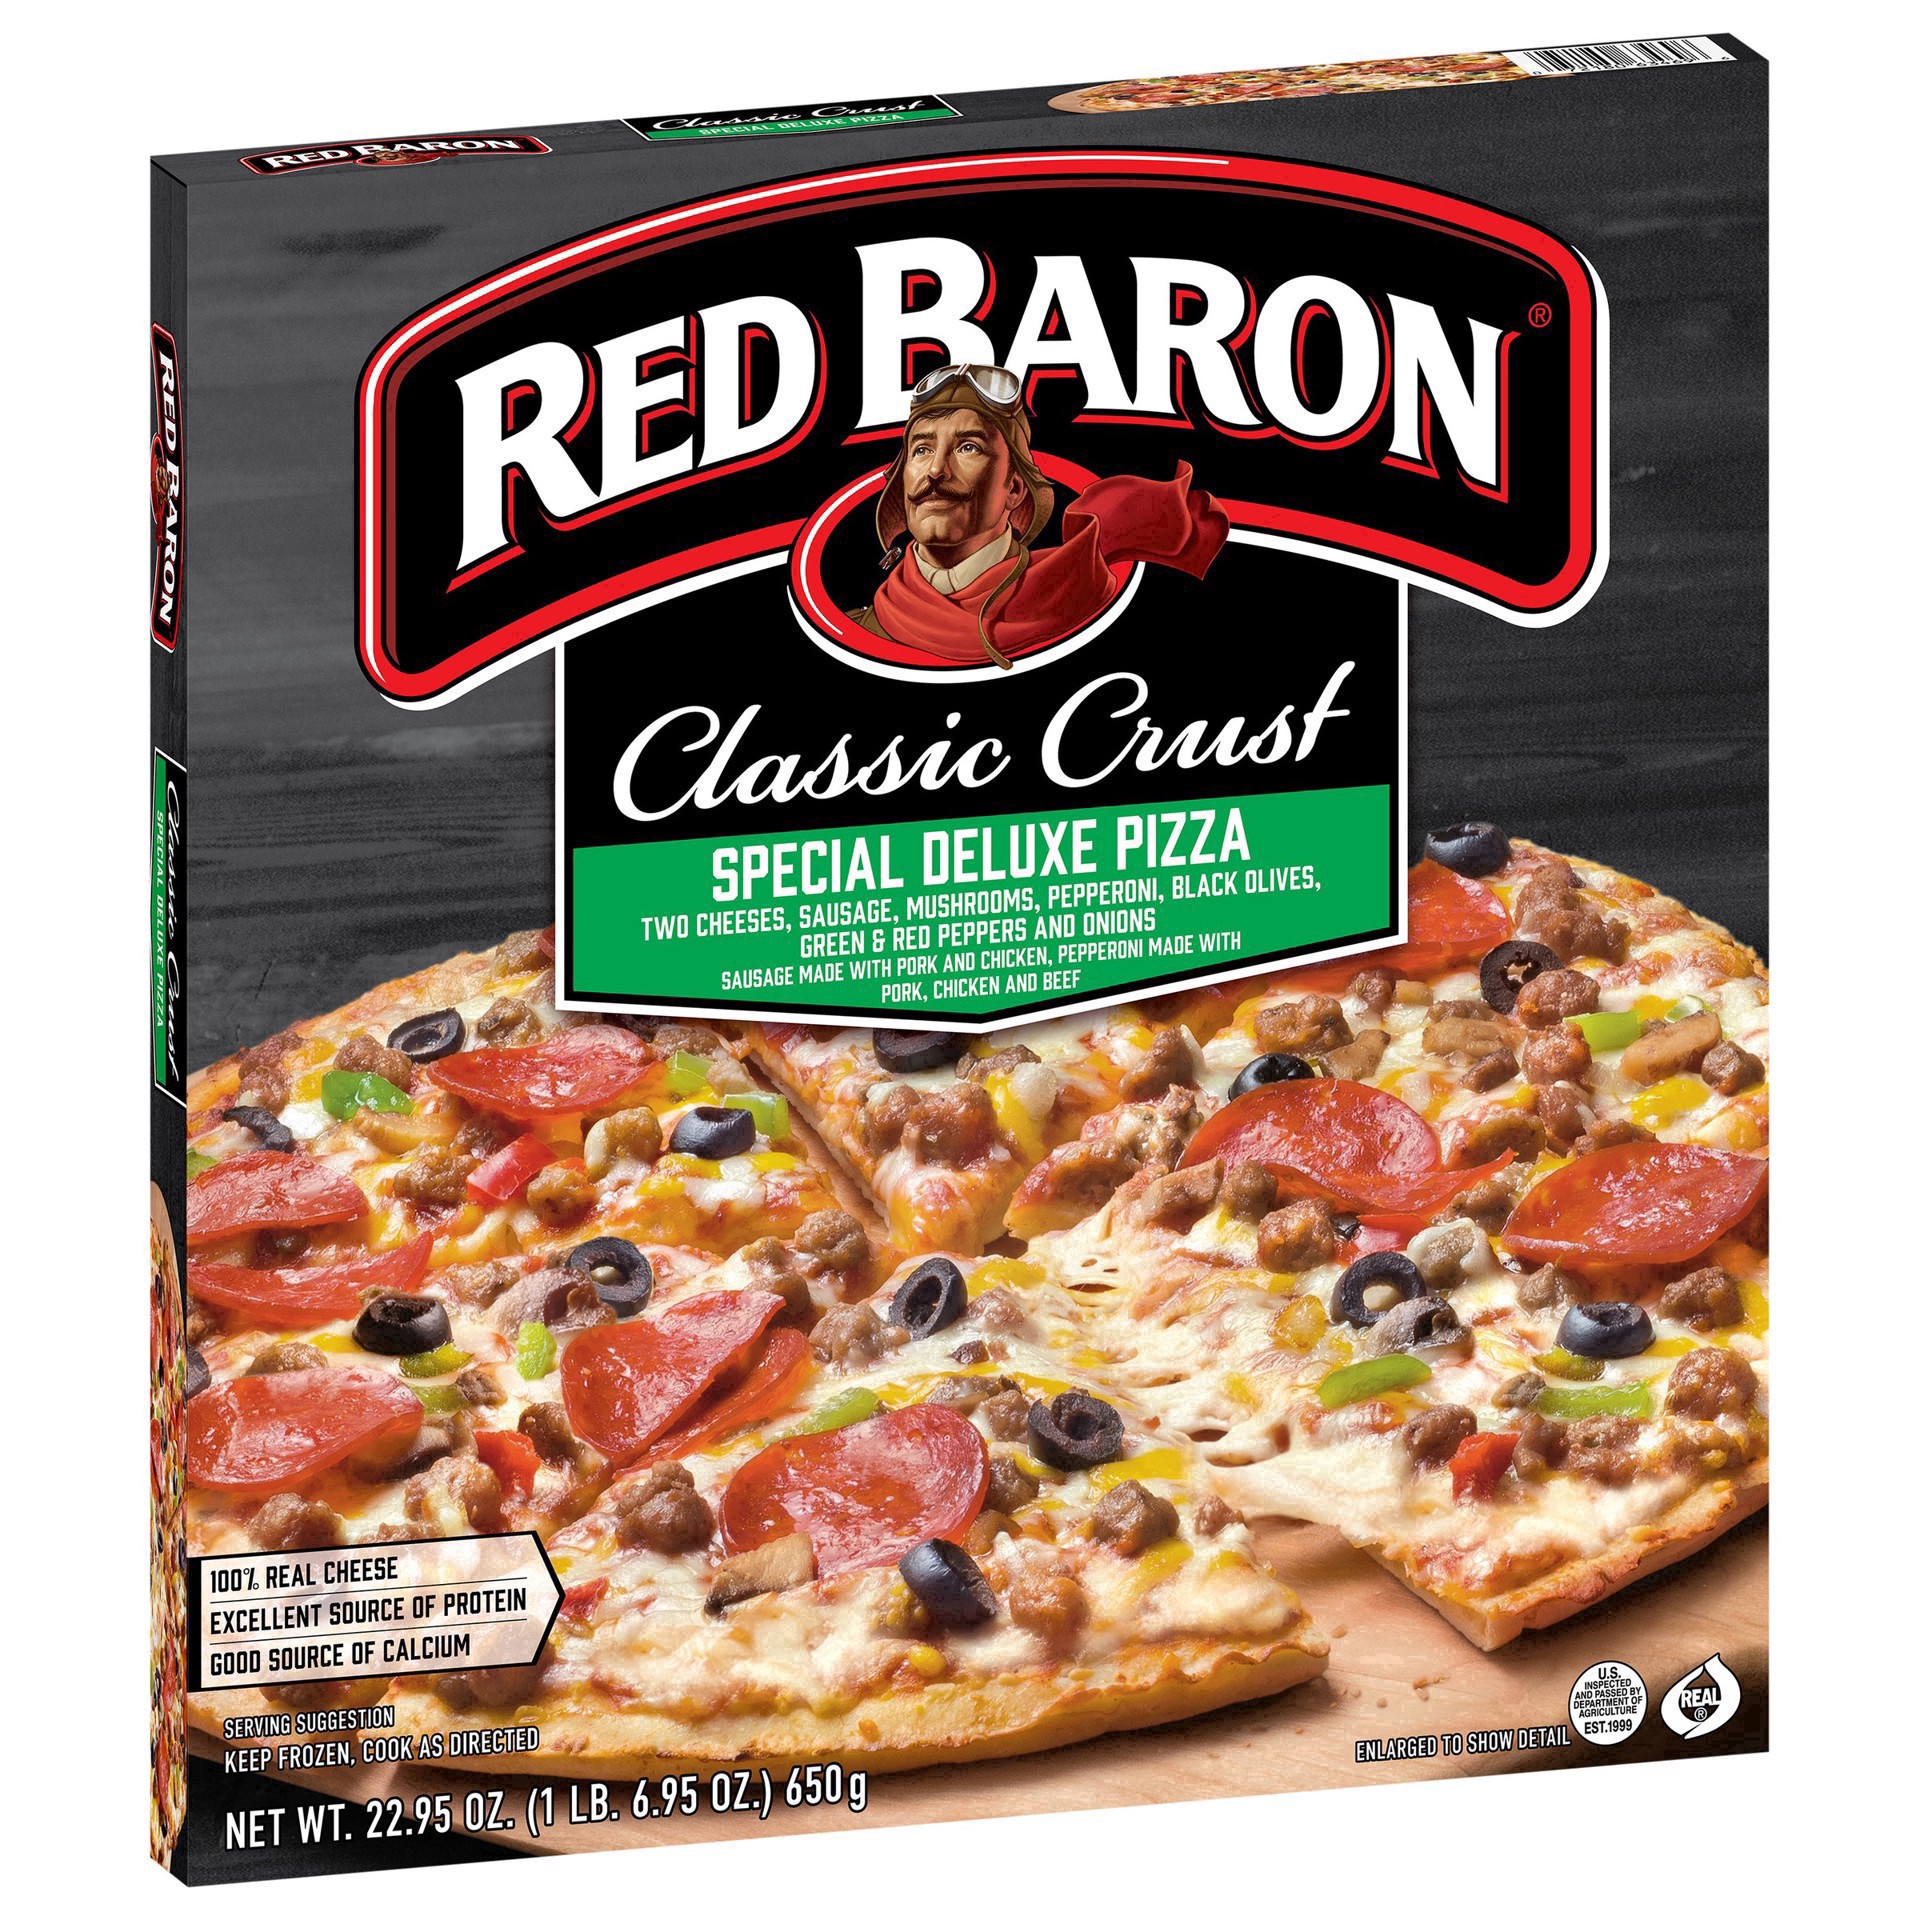 slide 49 of 89, Red Baron Frozen Pizza Classic Crust Special Deluxe, 1.43 lb